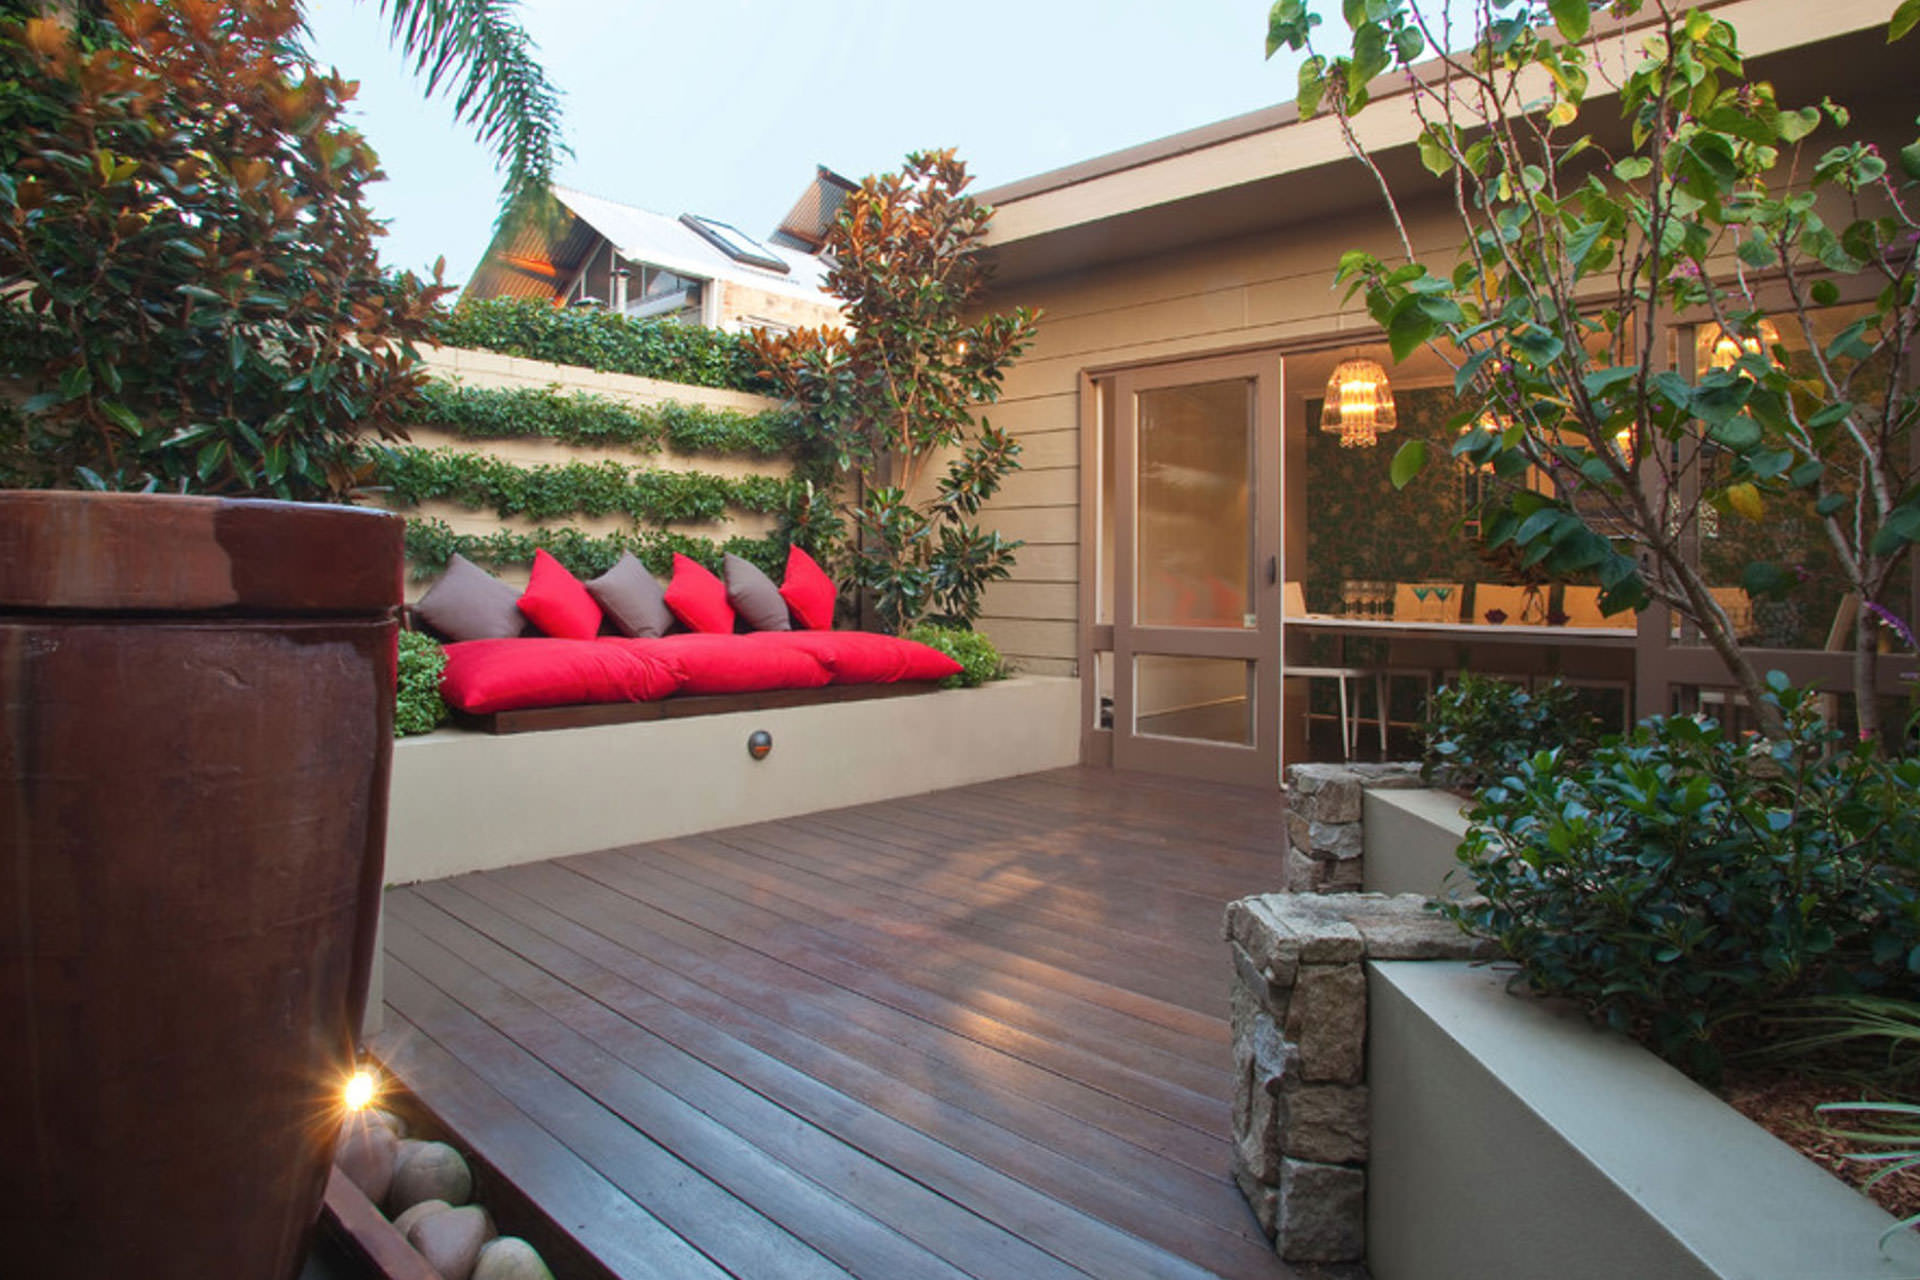 Outdoor Landscape Small Space
 5 Ideas for Making a Big Impact in a Small Outdoor Space